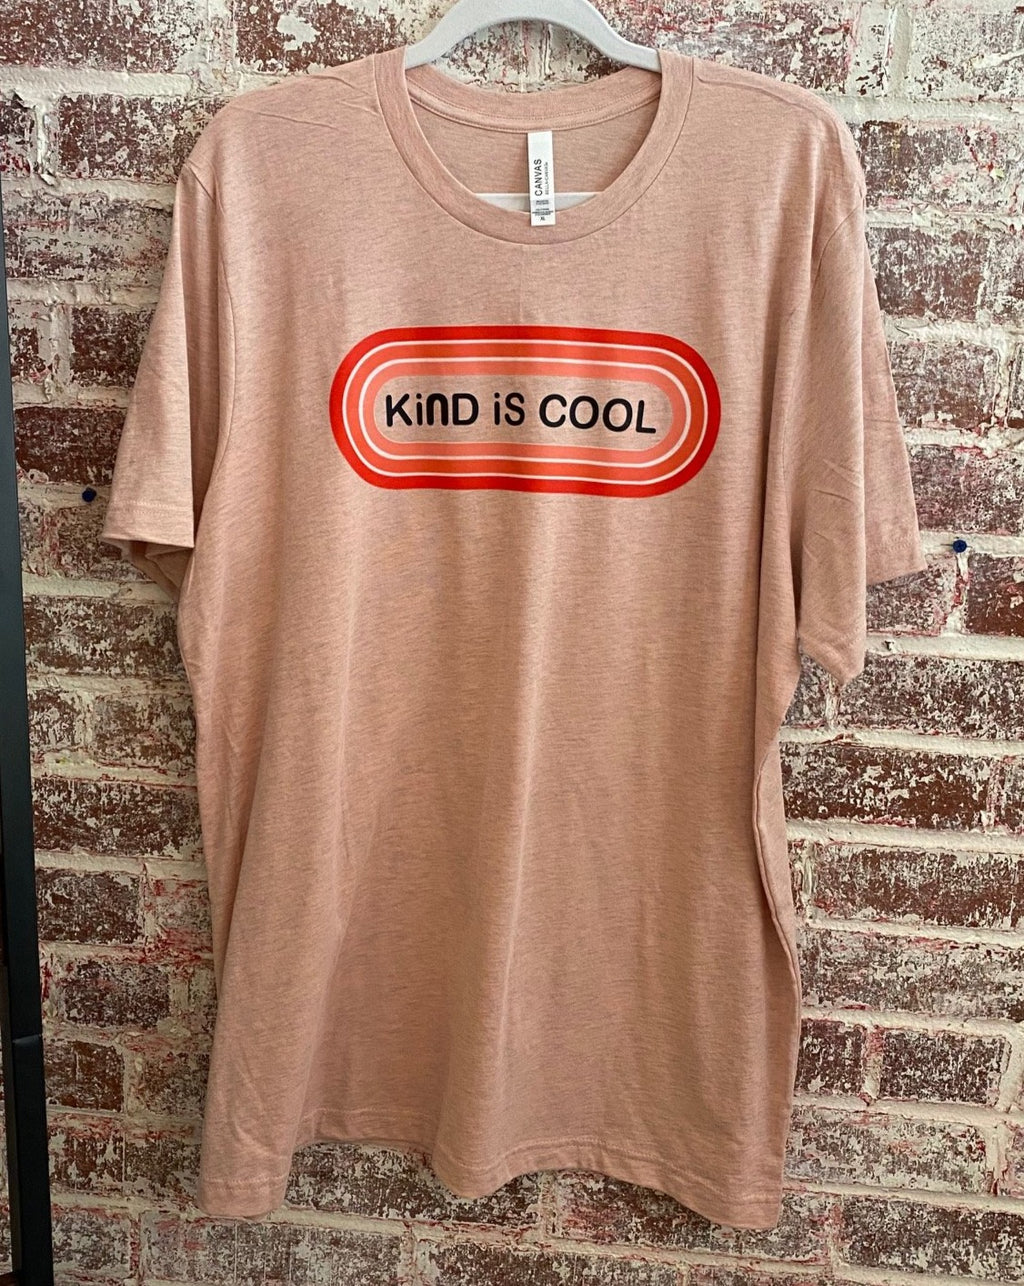 *FIRE SALE* Bella + Canvas 'Kind Is Cool' Tee